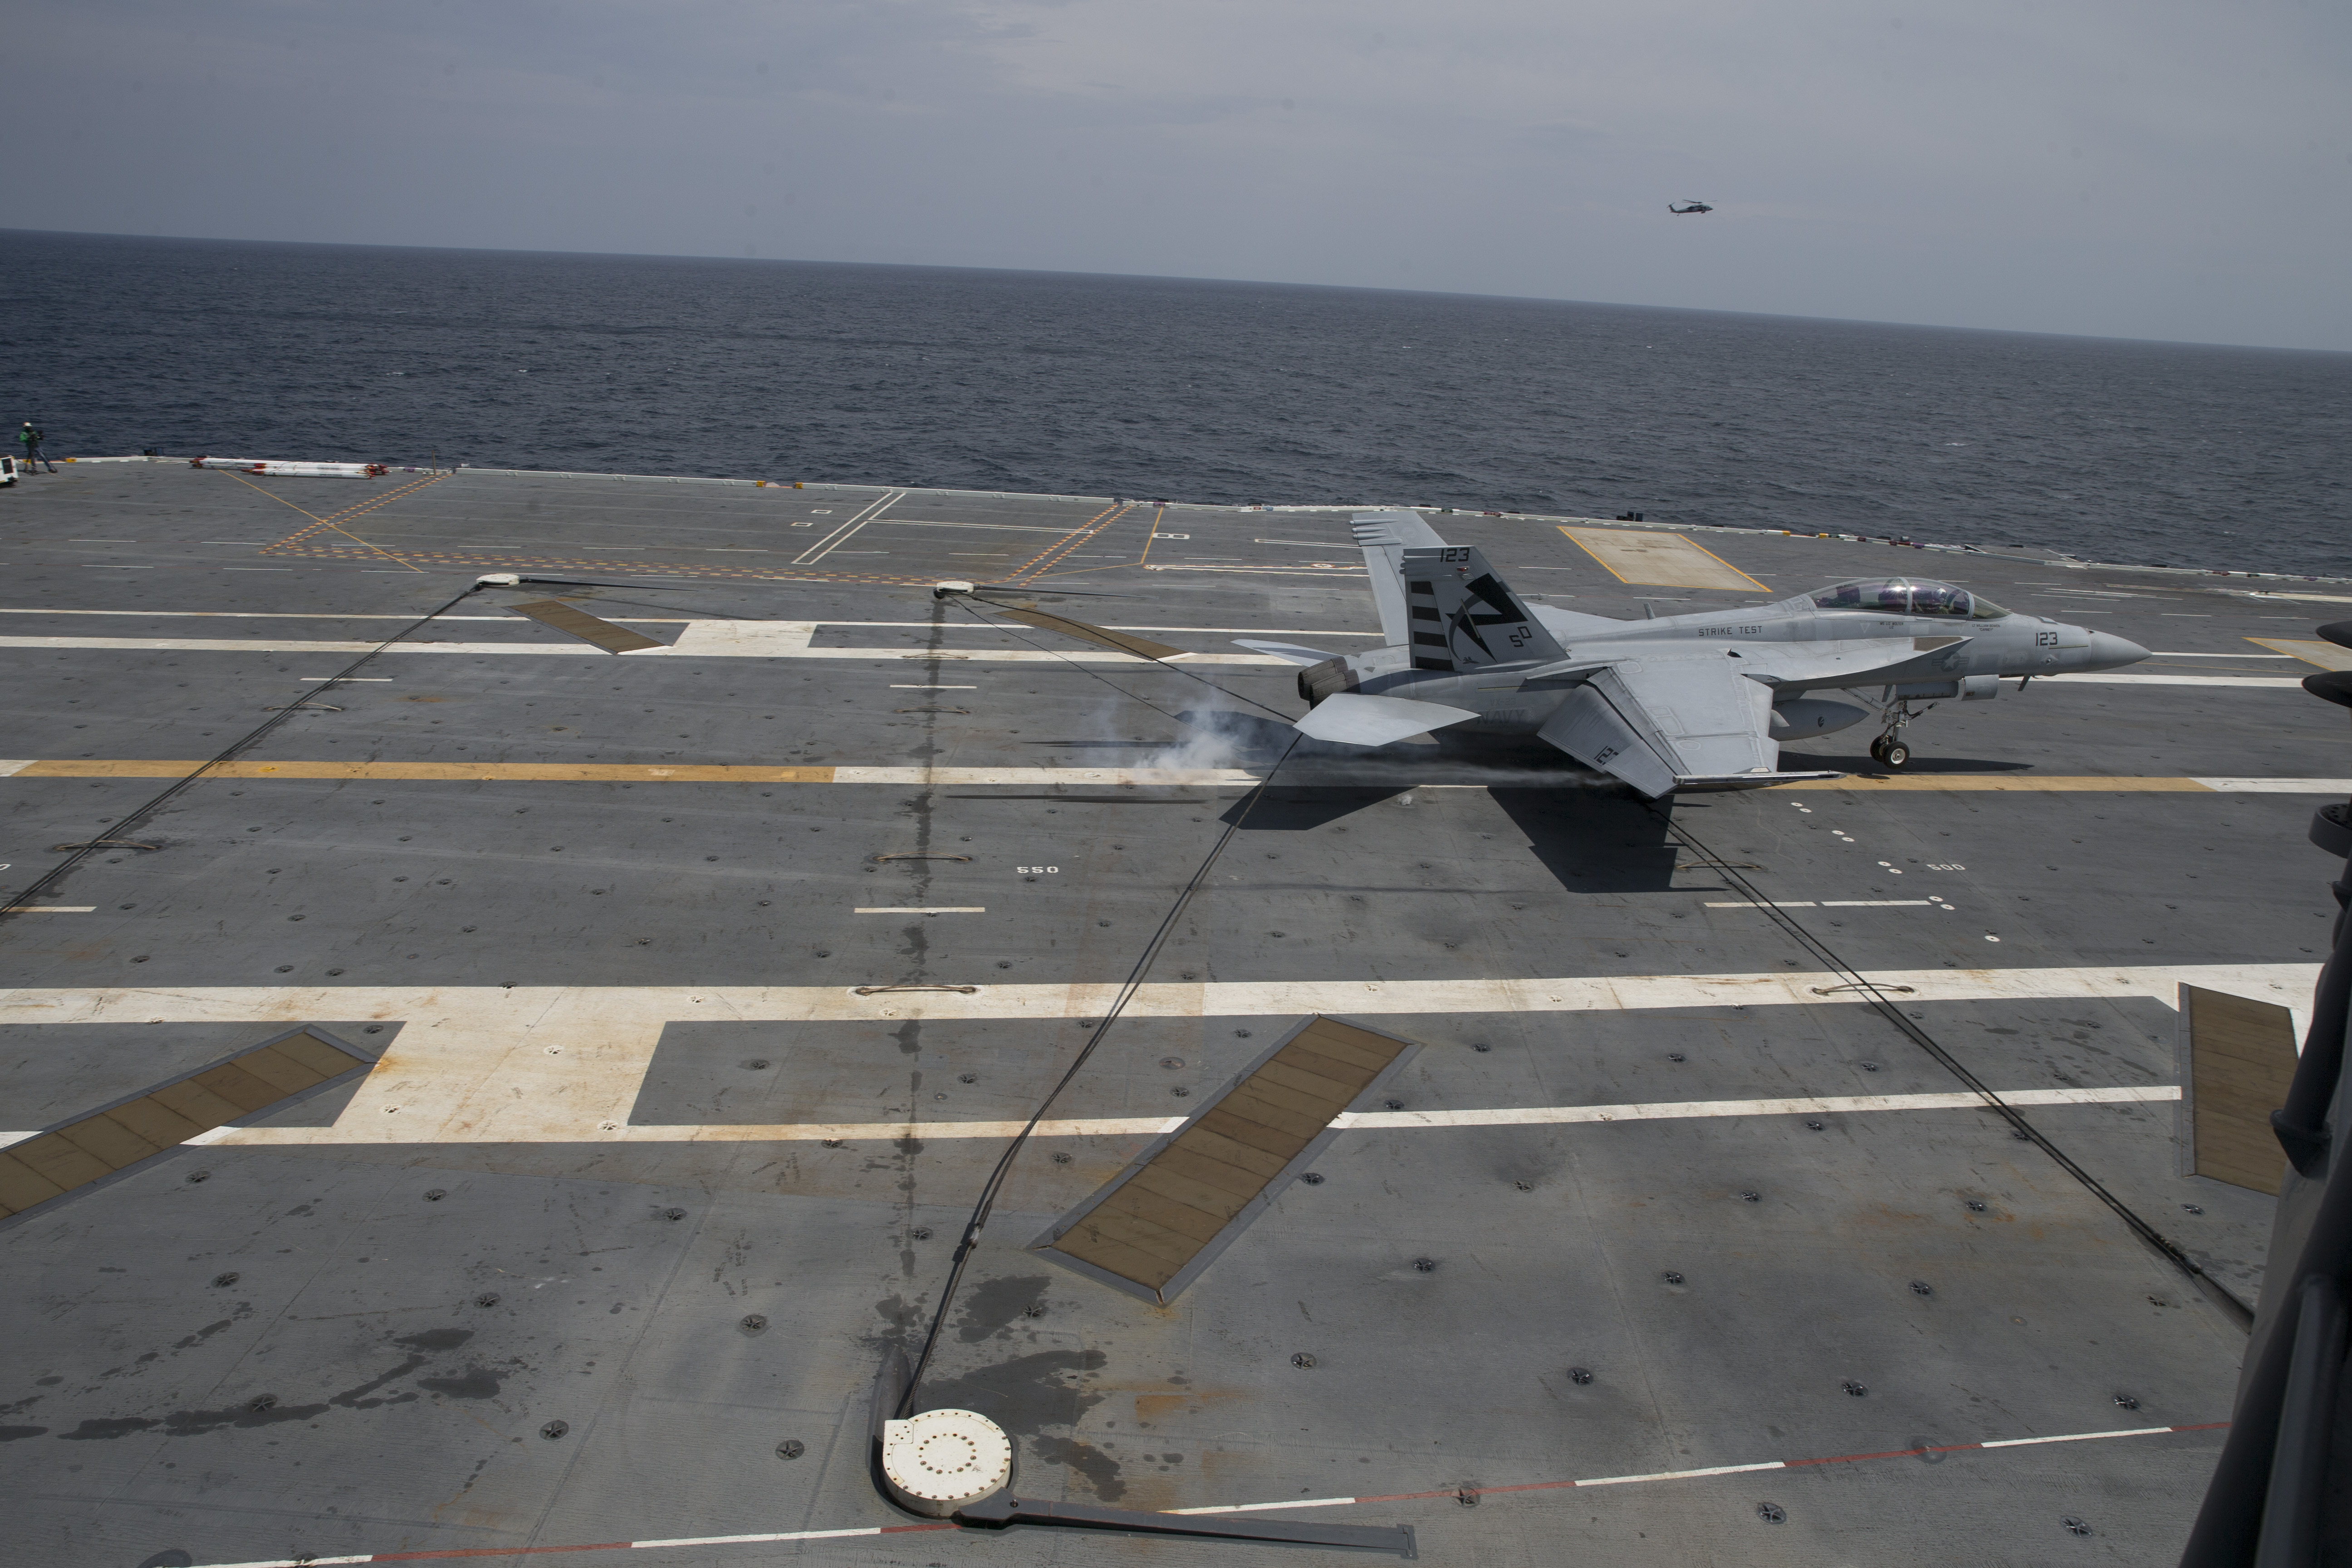 An F/A-18F Super Hornet performs an arrested landing aboard USS Gerald R. Ford. (U.S. Navy photo by Mass Communication Specialist 3rd Class Cathrine Campbell)